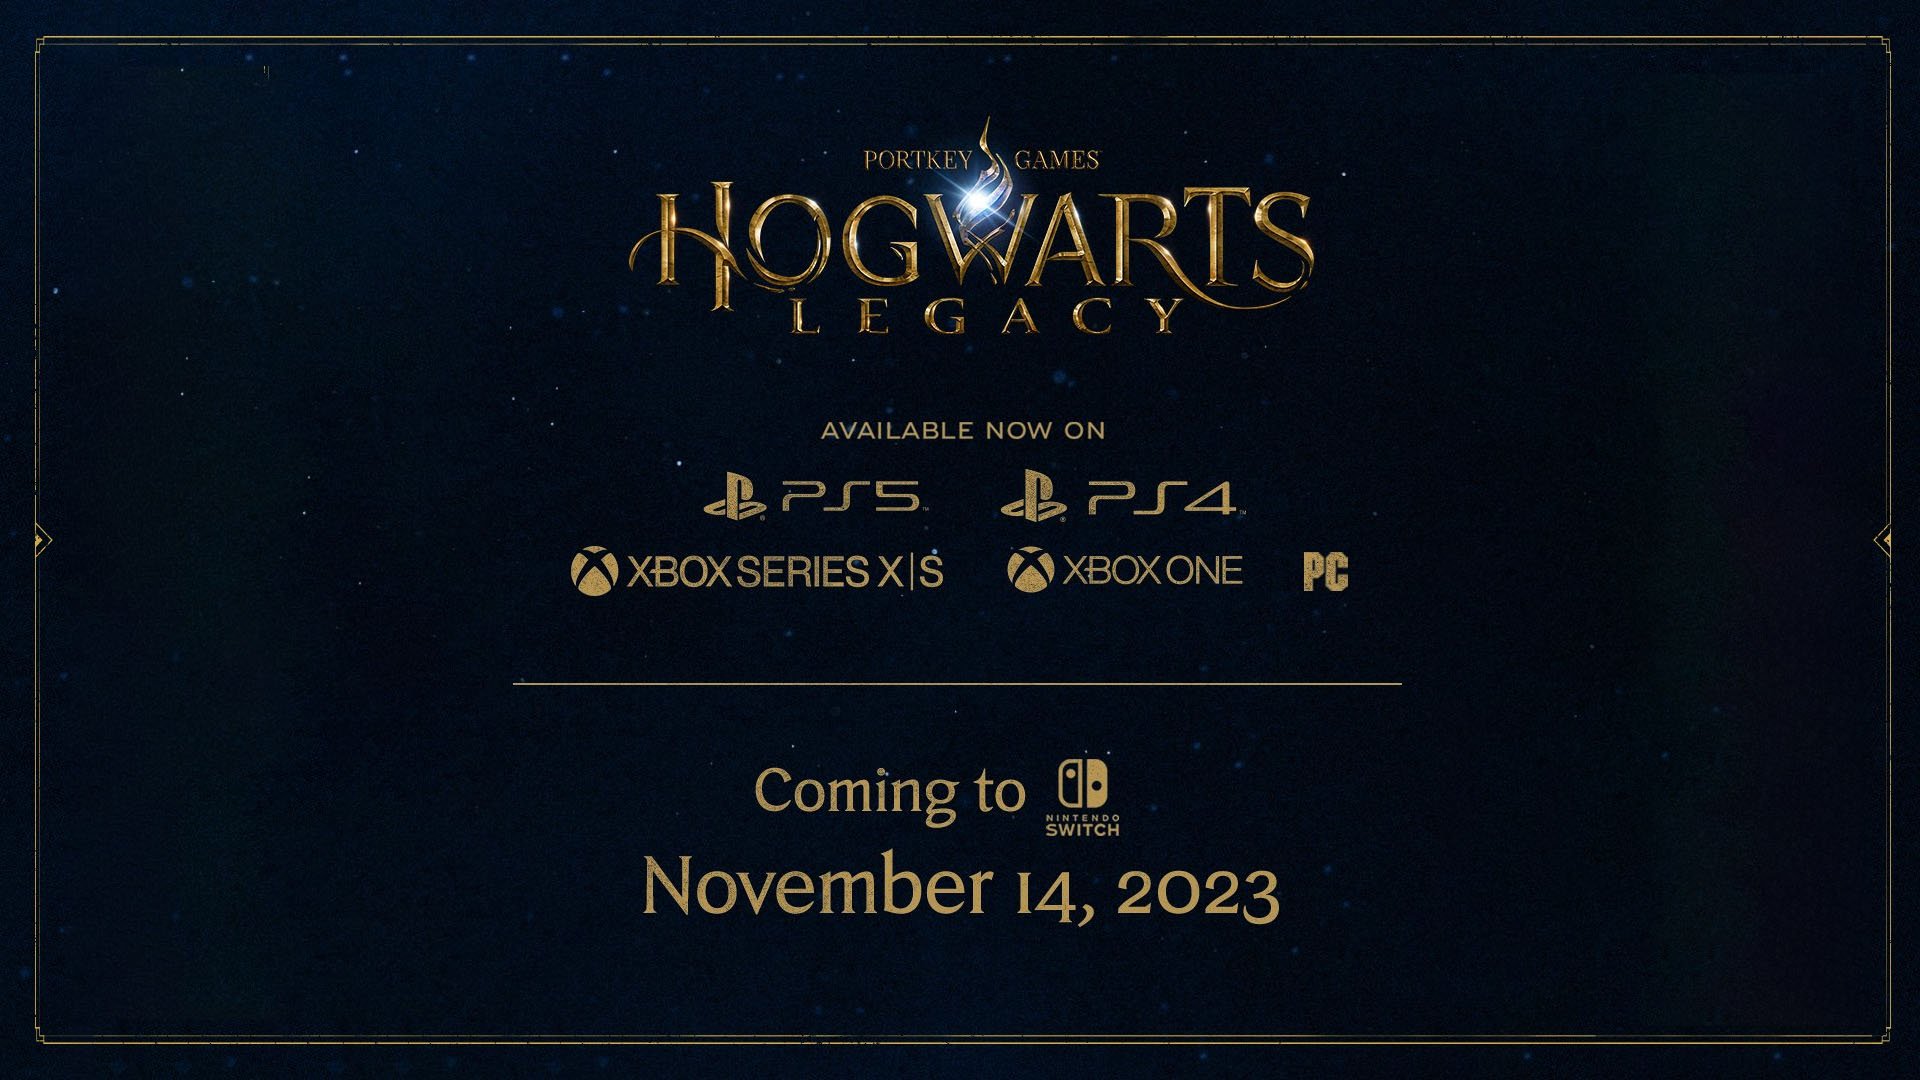 Harry Potter Hogwarts Legacy' Launch Date: PS4, PS5, Xbox One